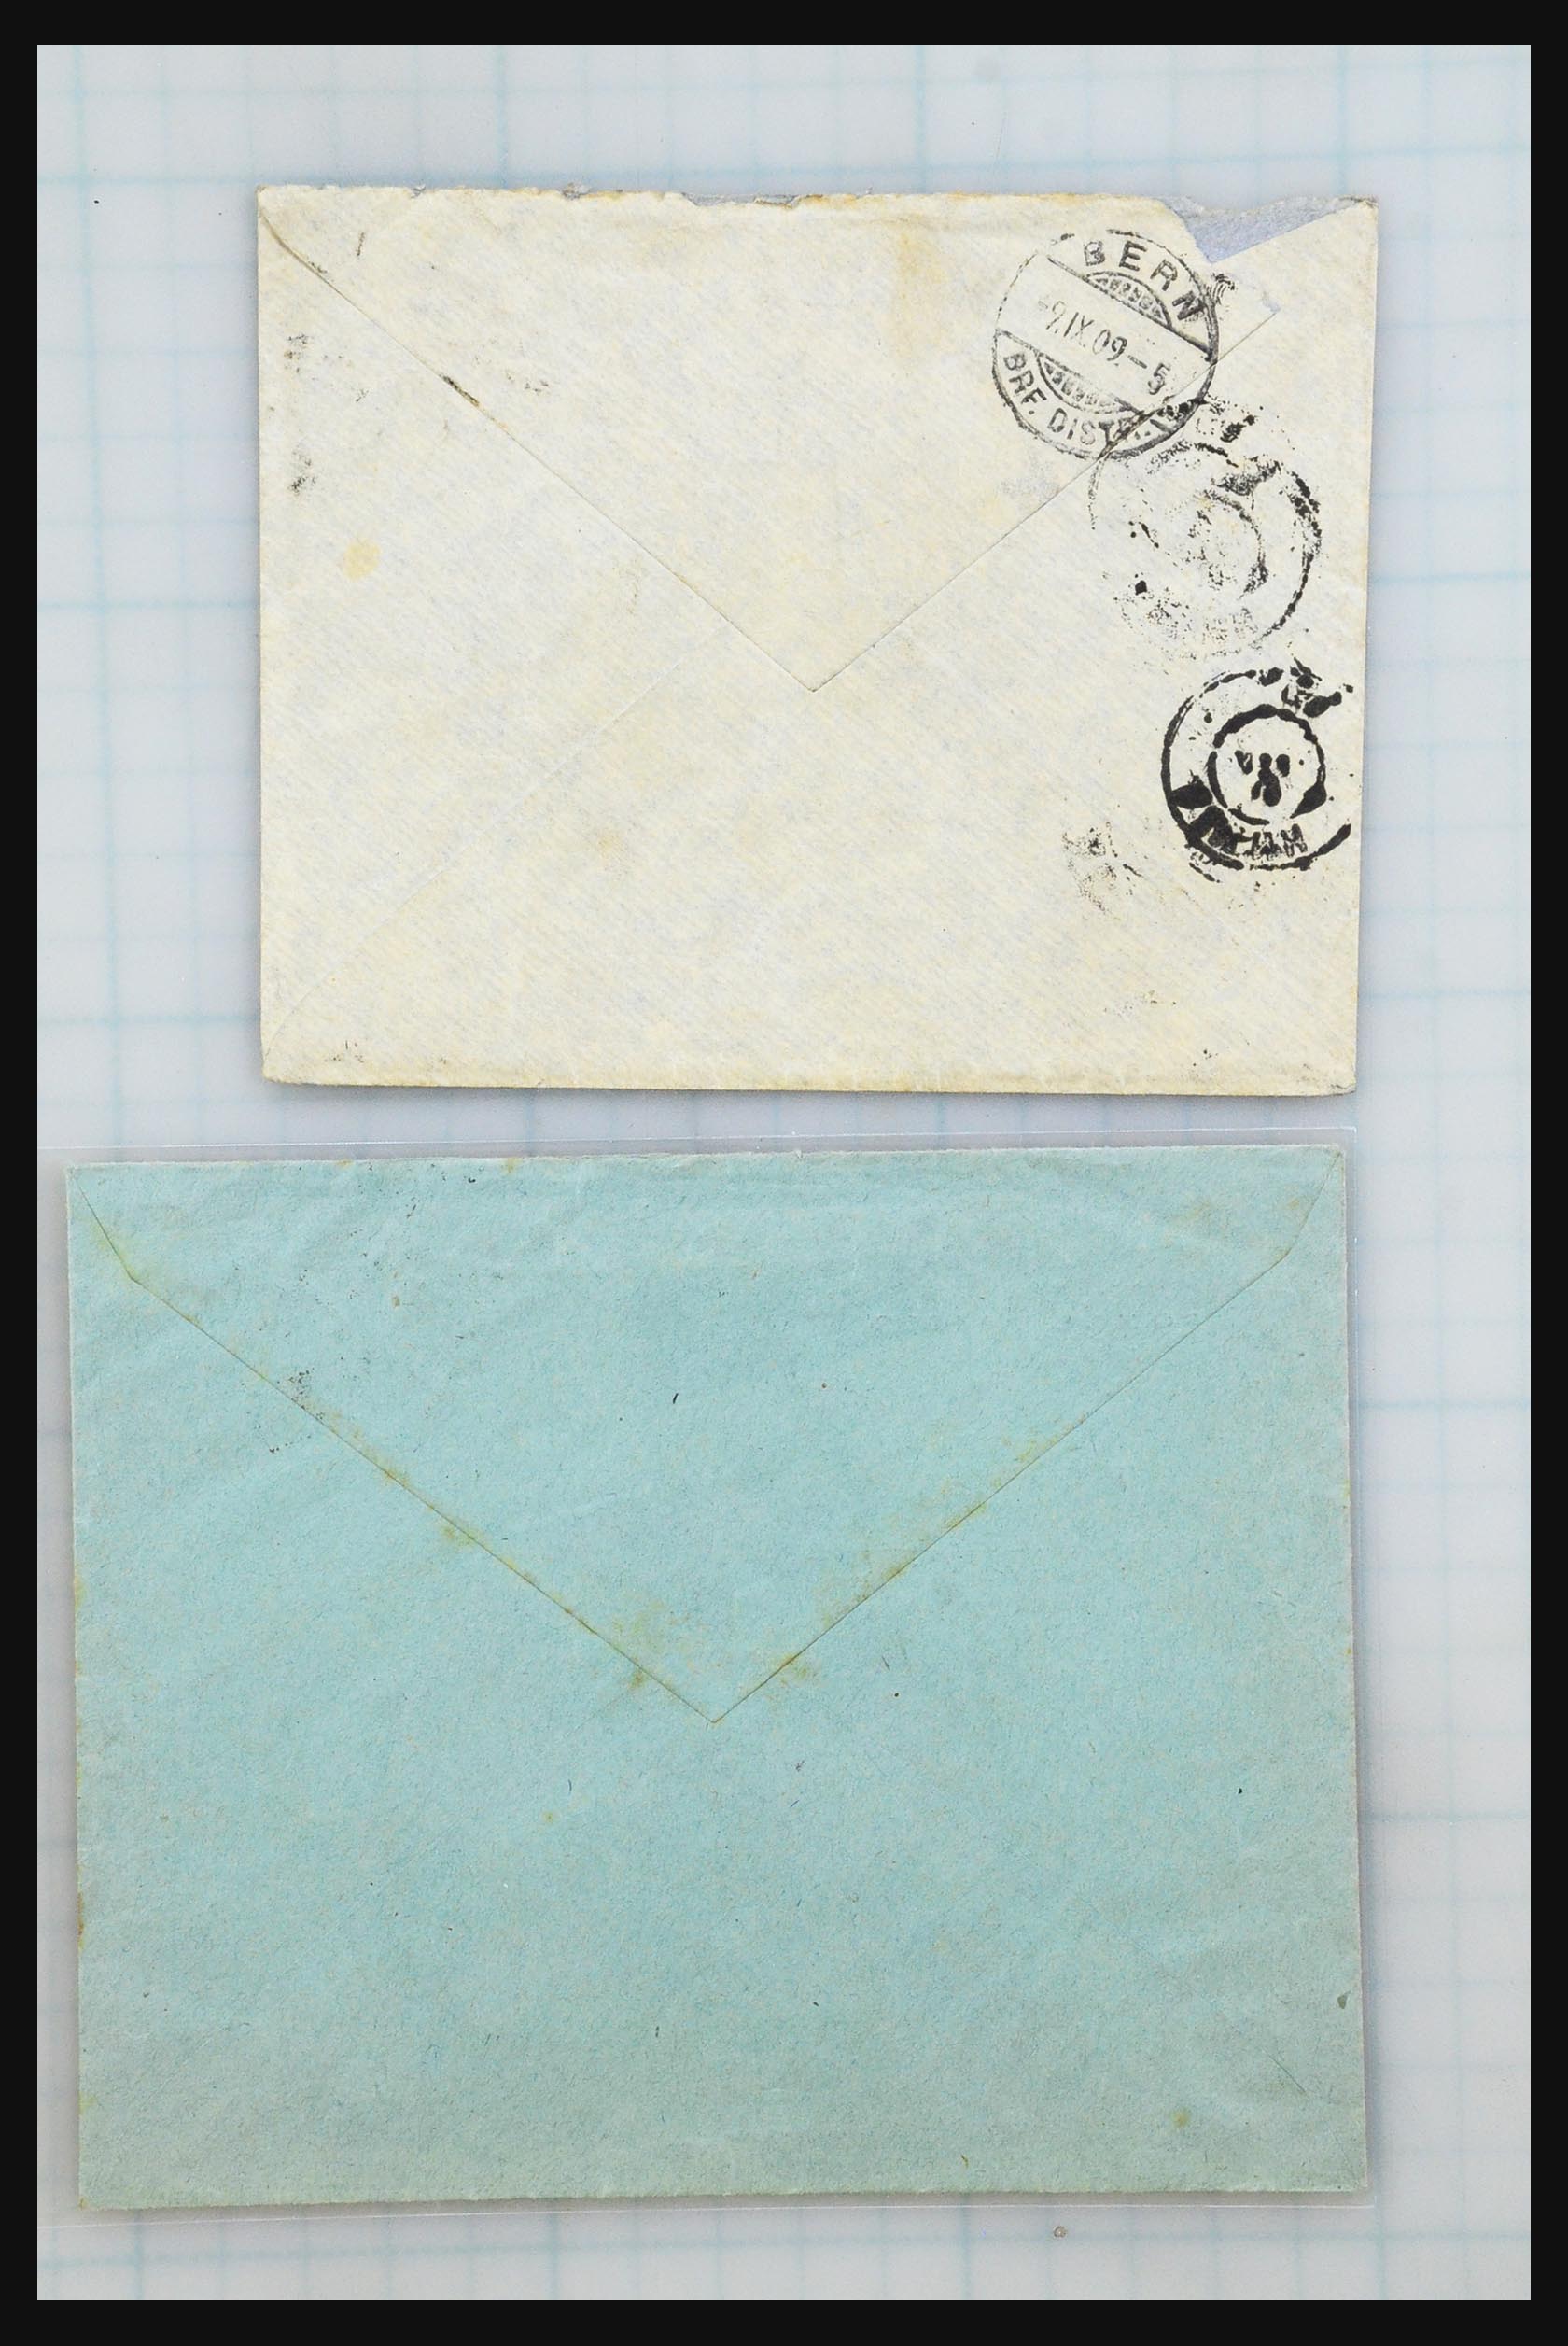 31358 045 - 31358 Portugal/Luxemburg/Greece covers 1880-1960.